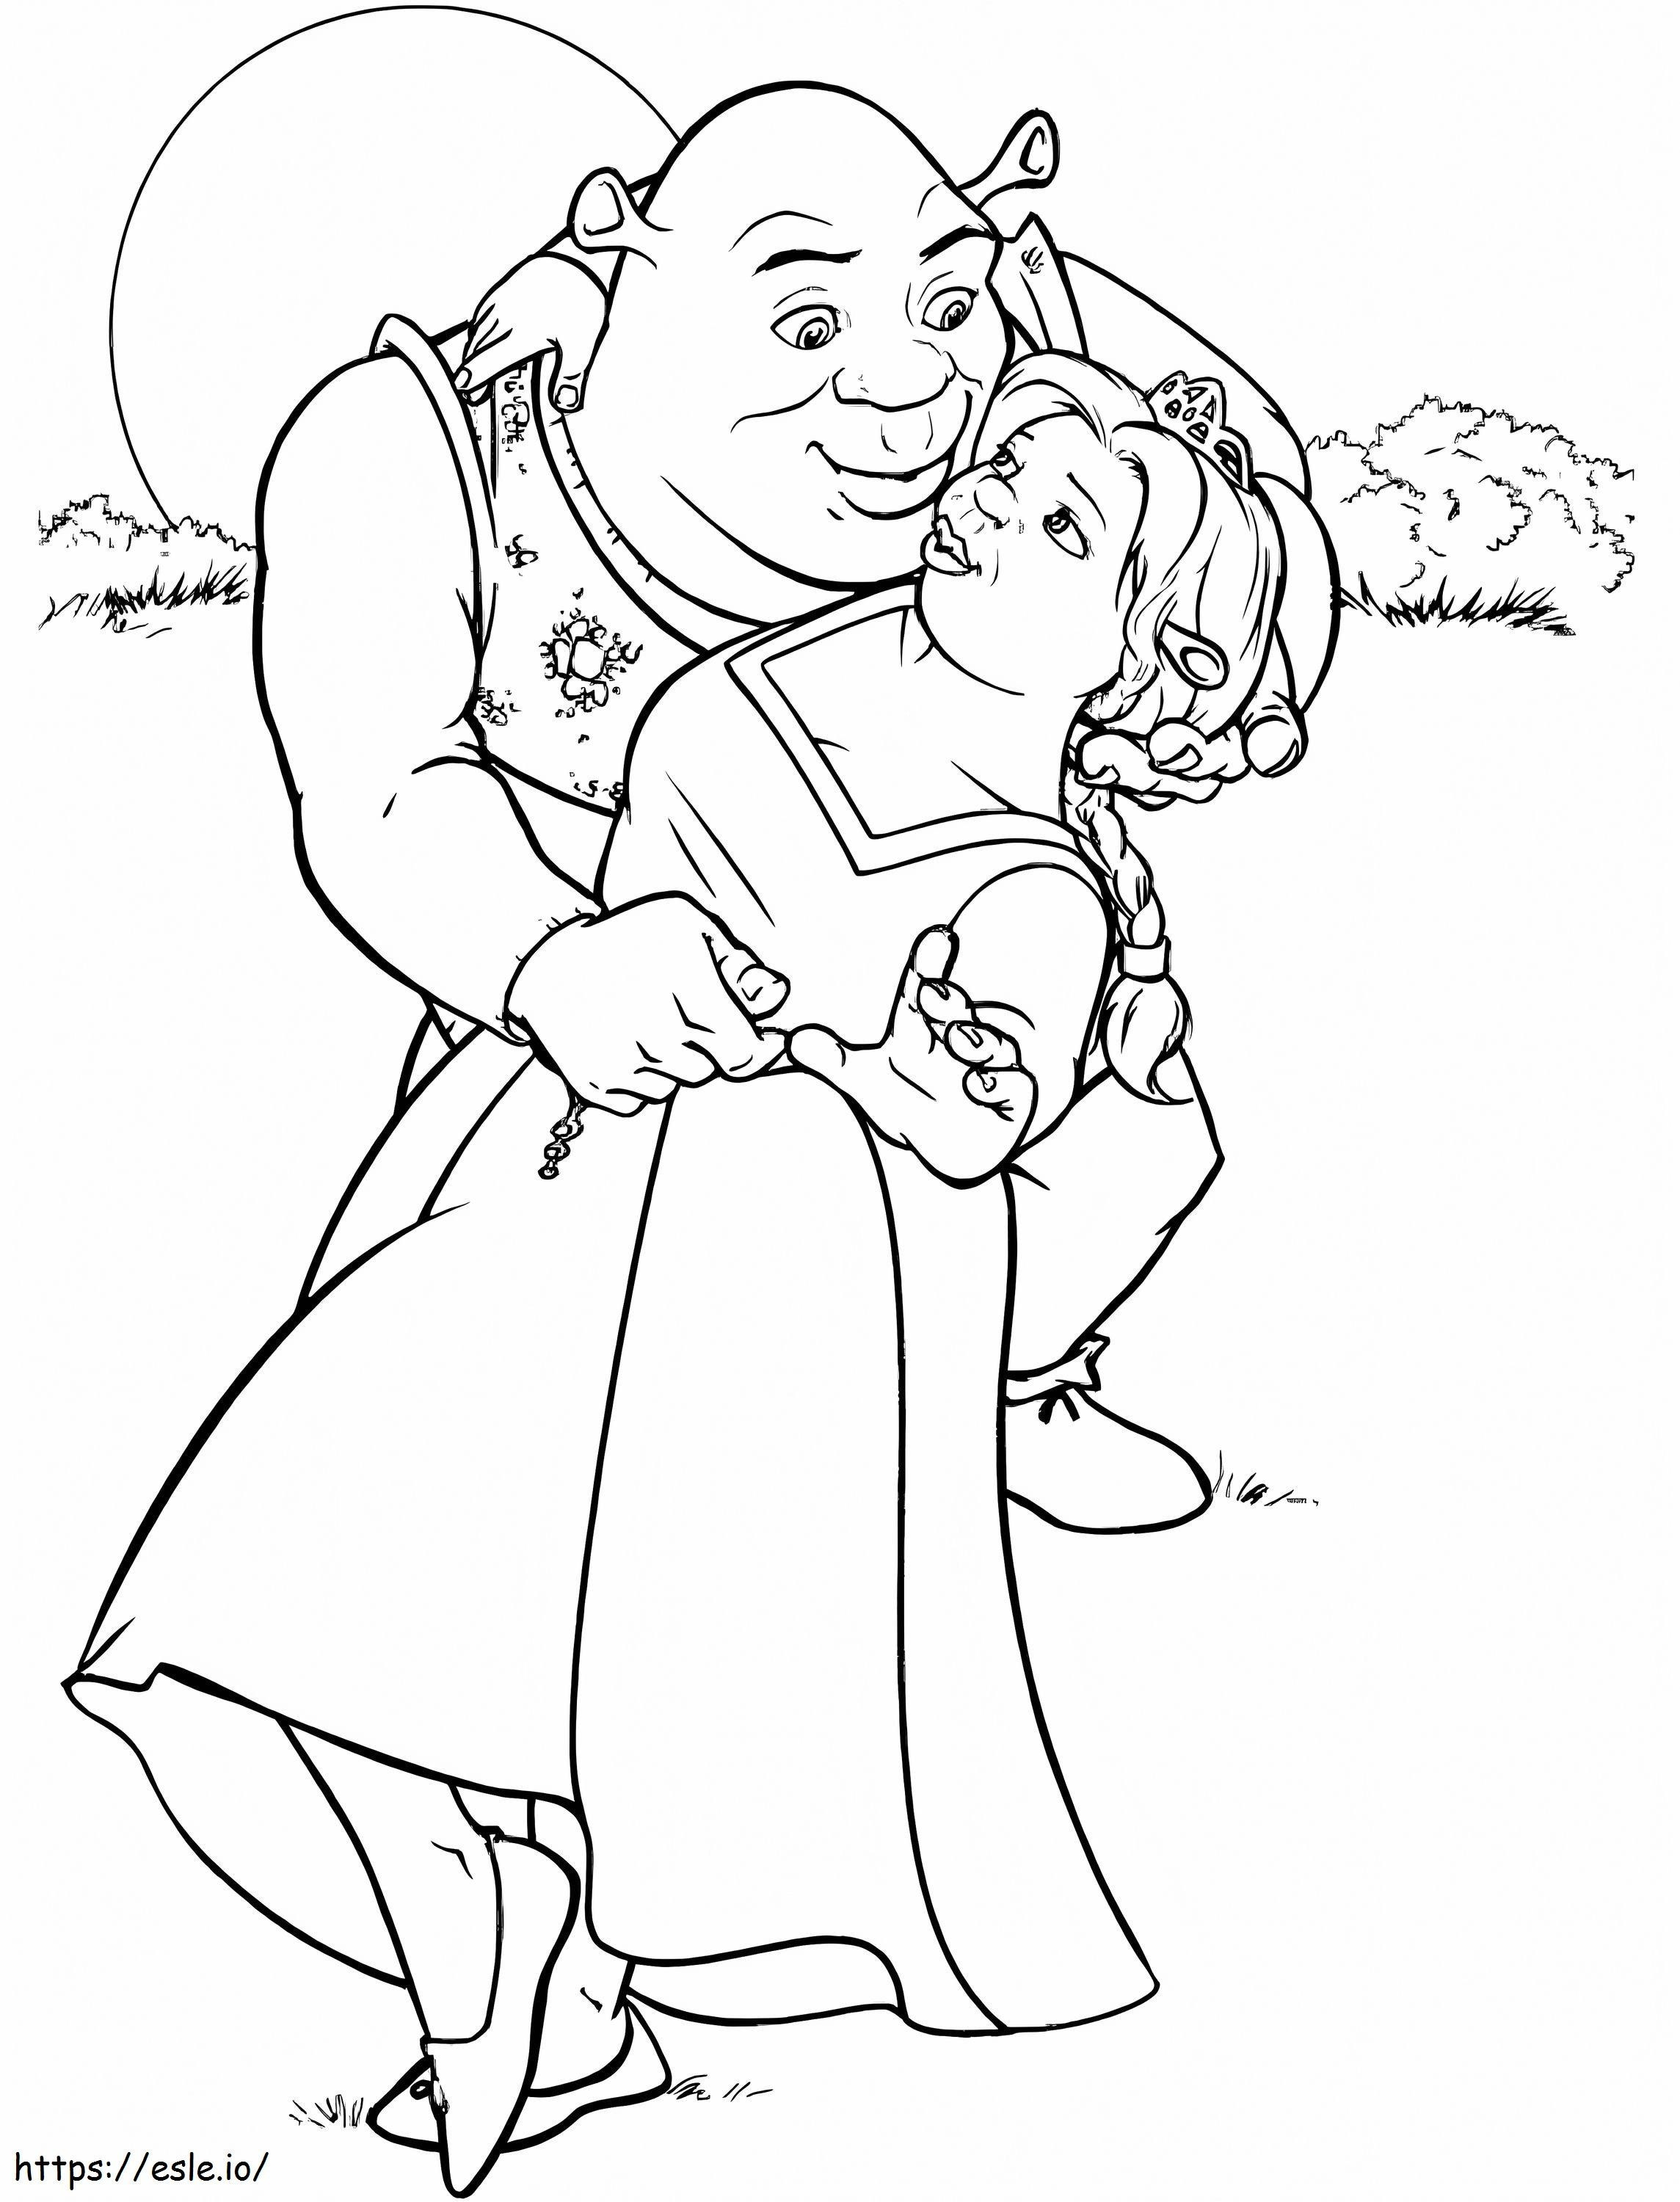 1568991163 Shrek Dancing With Fiona A4 coloring page